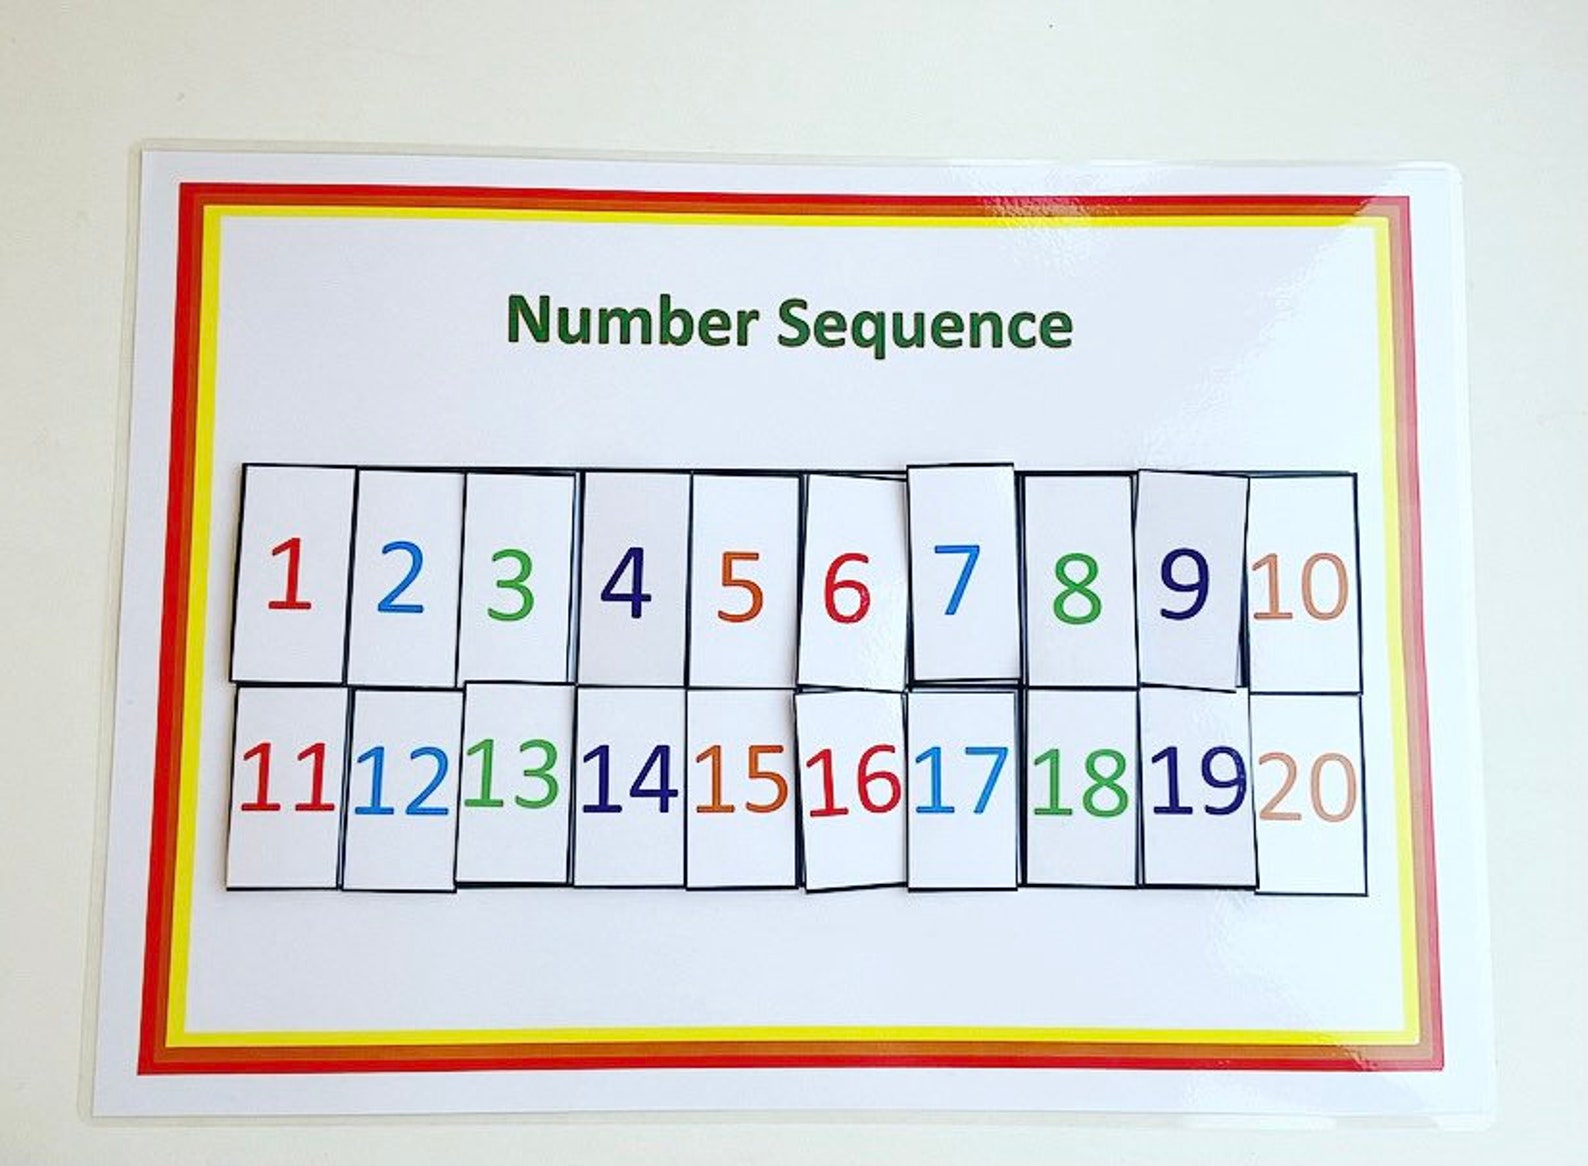 sequencing-numbers-1-20-worksheets-numbersworksheetcom-sequencing-numbers-1-20-worksheets